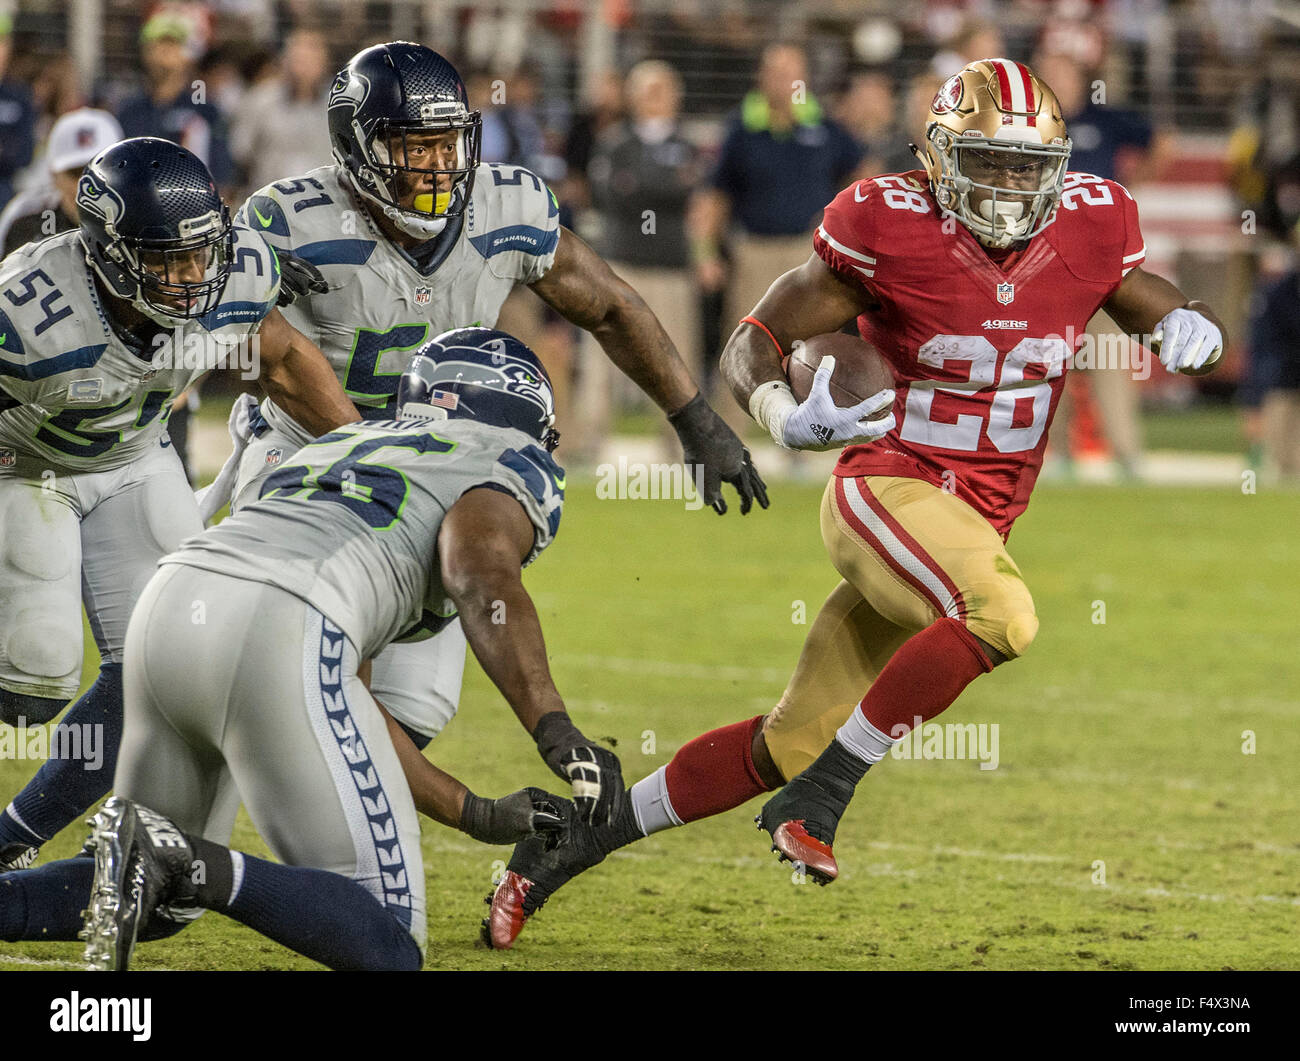 Santa Clara, California, USA. 22nd Oct, 2015. San Francisco 49ers running back Carlos Hyde (28) pulls away from Seattle Seahawks outside linebacker Bruce Irvin (51), middle linebacker Bobby Wagner (54) and defensive end Cliff Avril (56) on Thursday, October 22, 2015, at Levis Stadium in Santa Clara, California. The Seahawks defeated the 49ers 20-3 Al Golub/CSM/Alamy Live News Stock Photo